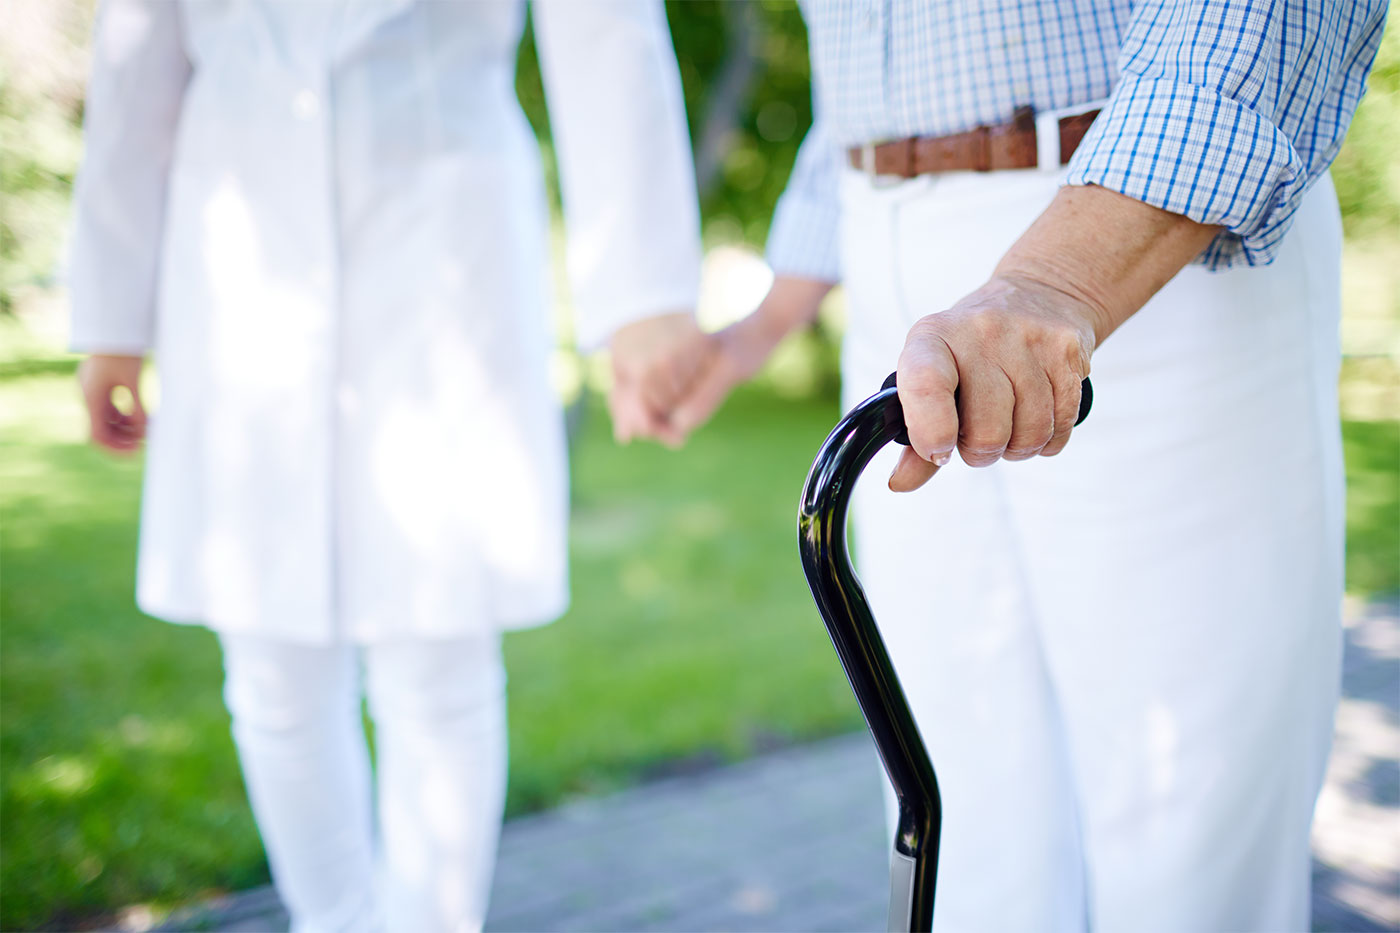 Getting Around with Your Medical Walking Aid